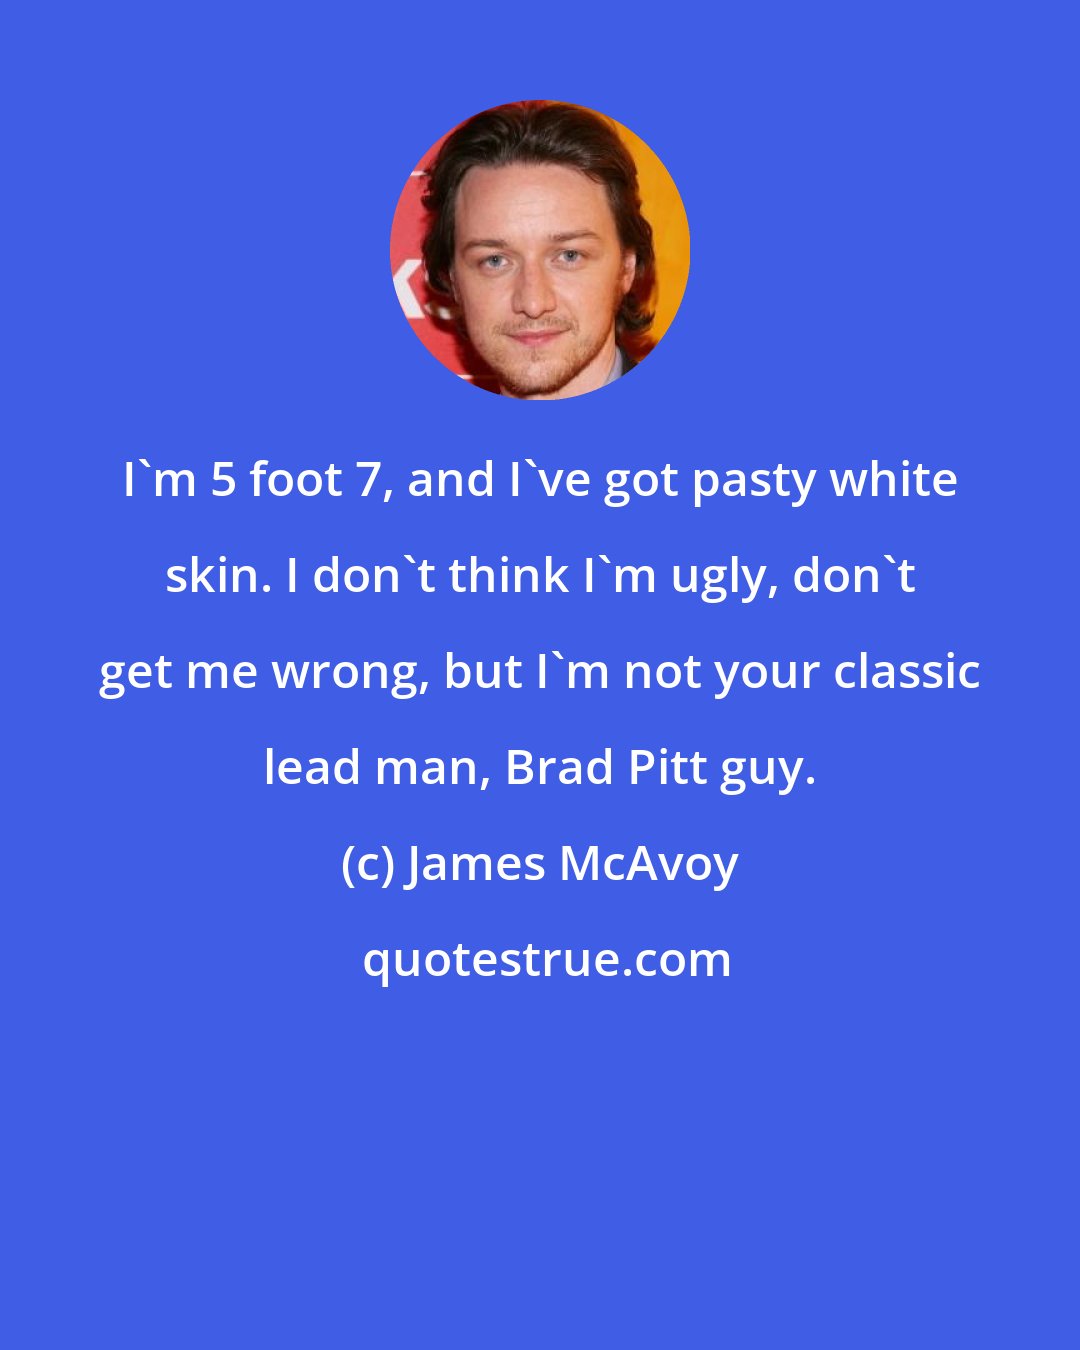 James McAvoy: I'm 5 foot 7, and I've got pasty white skin. I don't think I'm ugly, don't get me wrong, but I'm not your classic lead man, Brad Pitt guy.